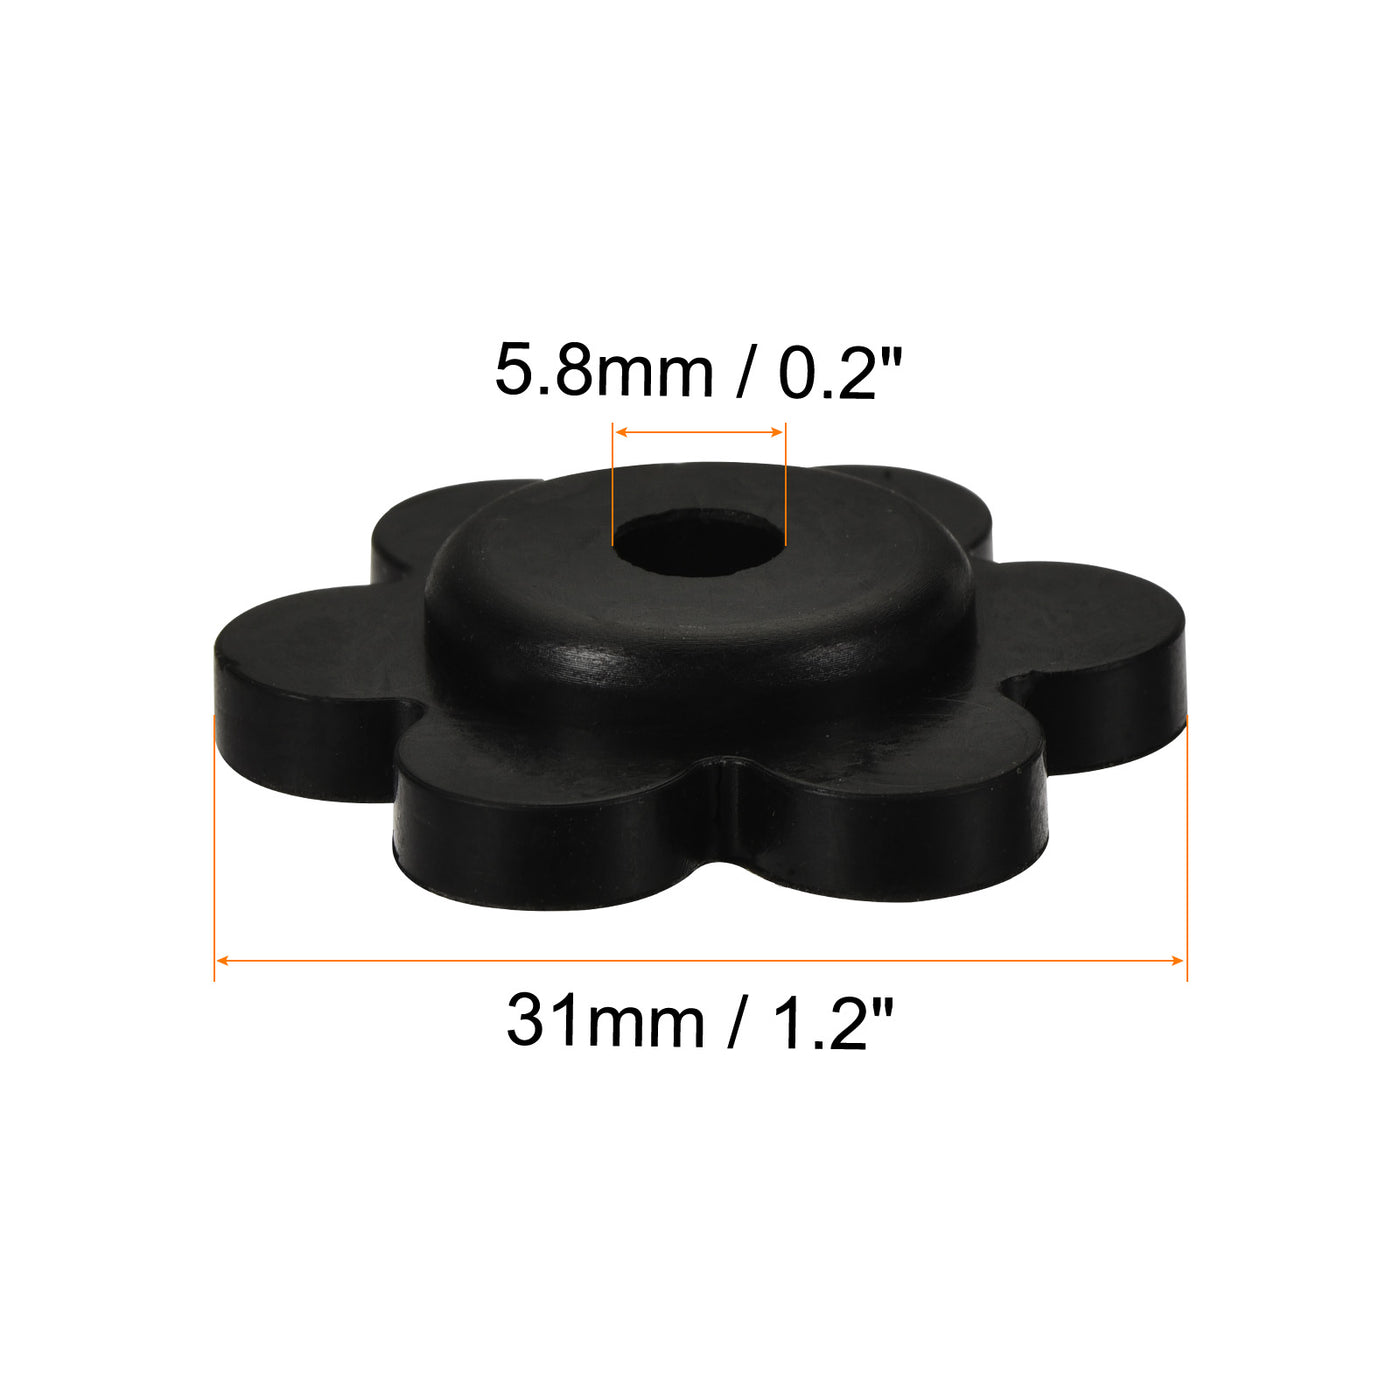 Harfington Garden Flag Stoppers, Rubber Stops Anti-Wind Accessories Flower Shape for Yard Flag Stand Poles, Black Pack of 15